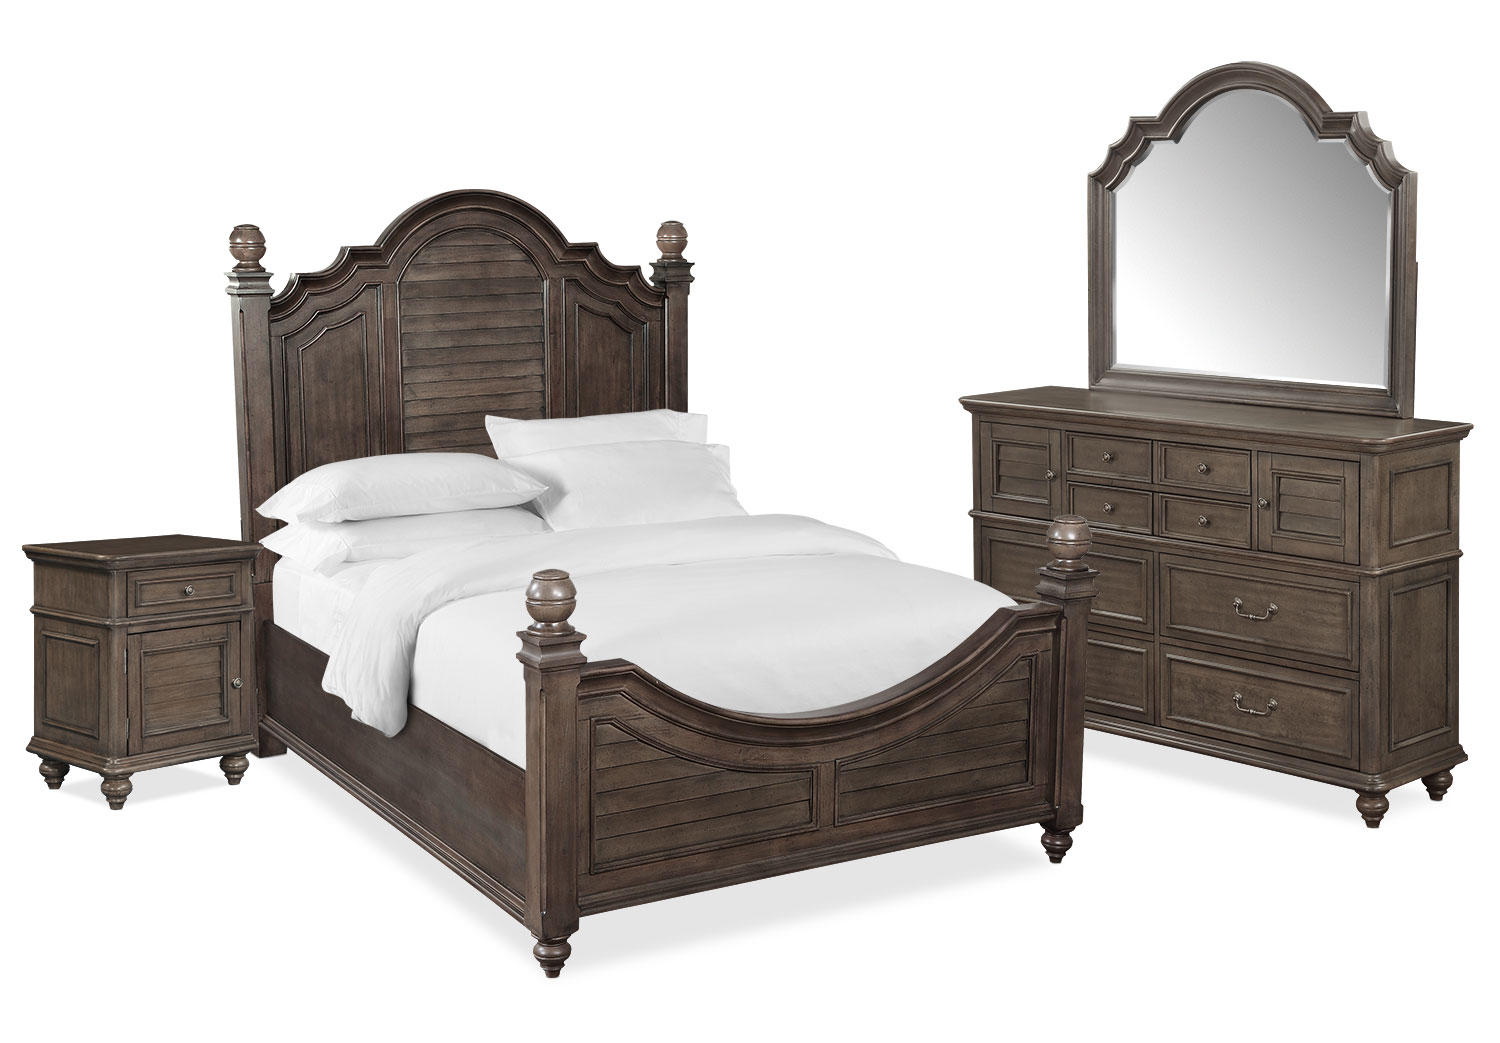 Charleston 6 Piece Poster Bedroom Set With Nightstand Dresser And Mirror Value City Furniture